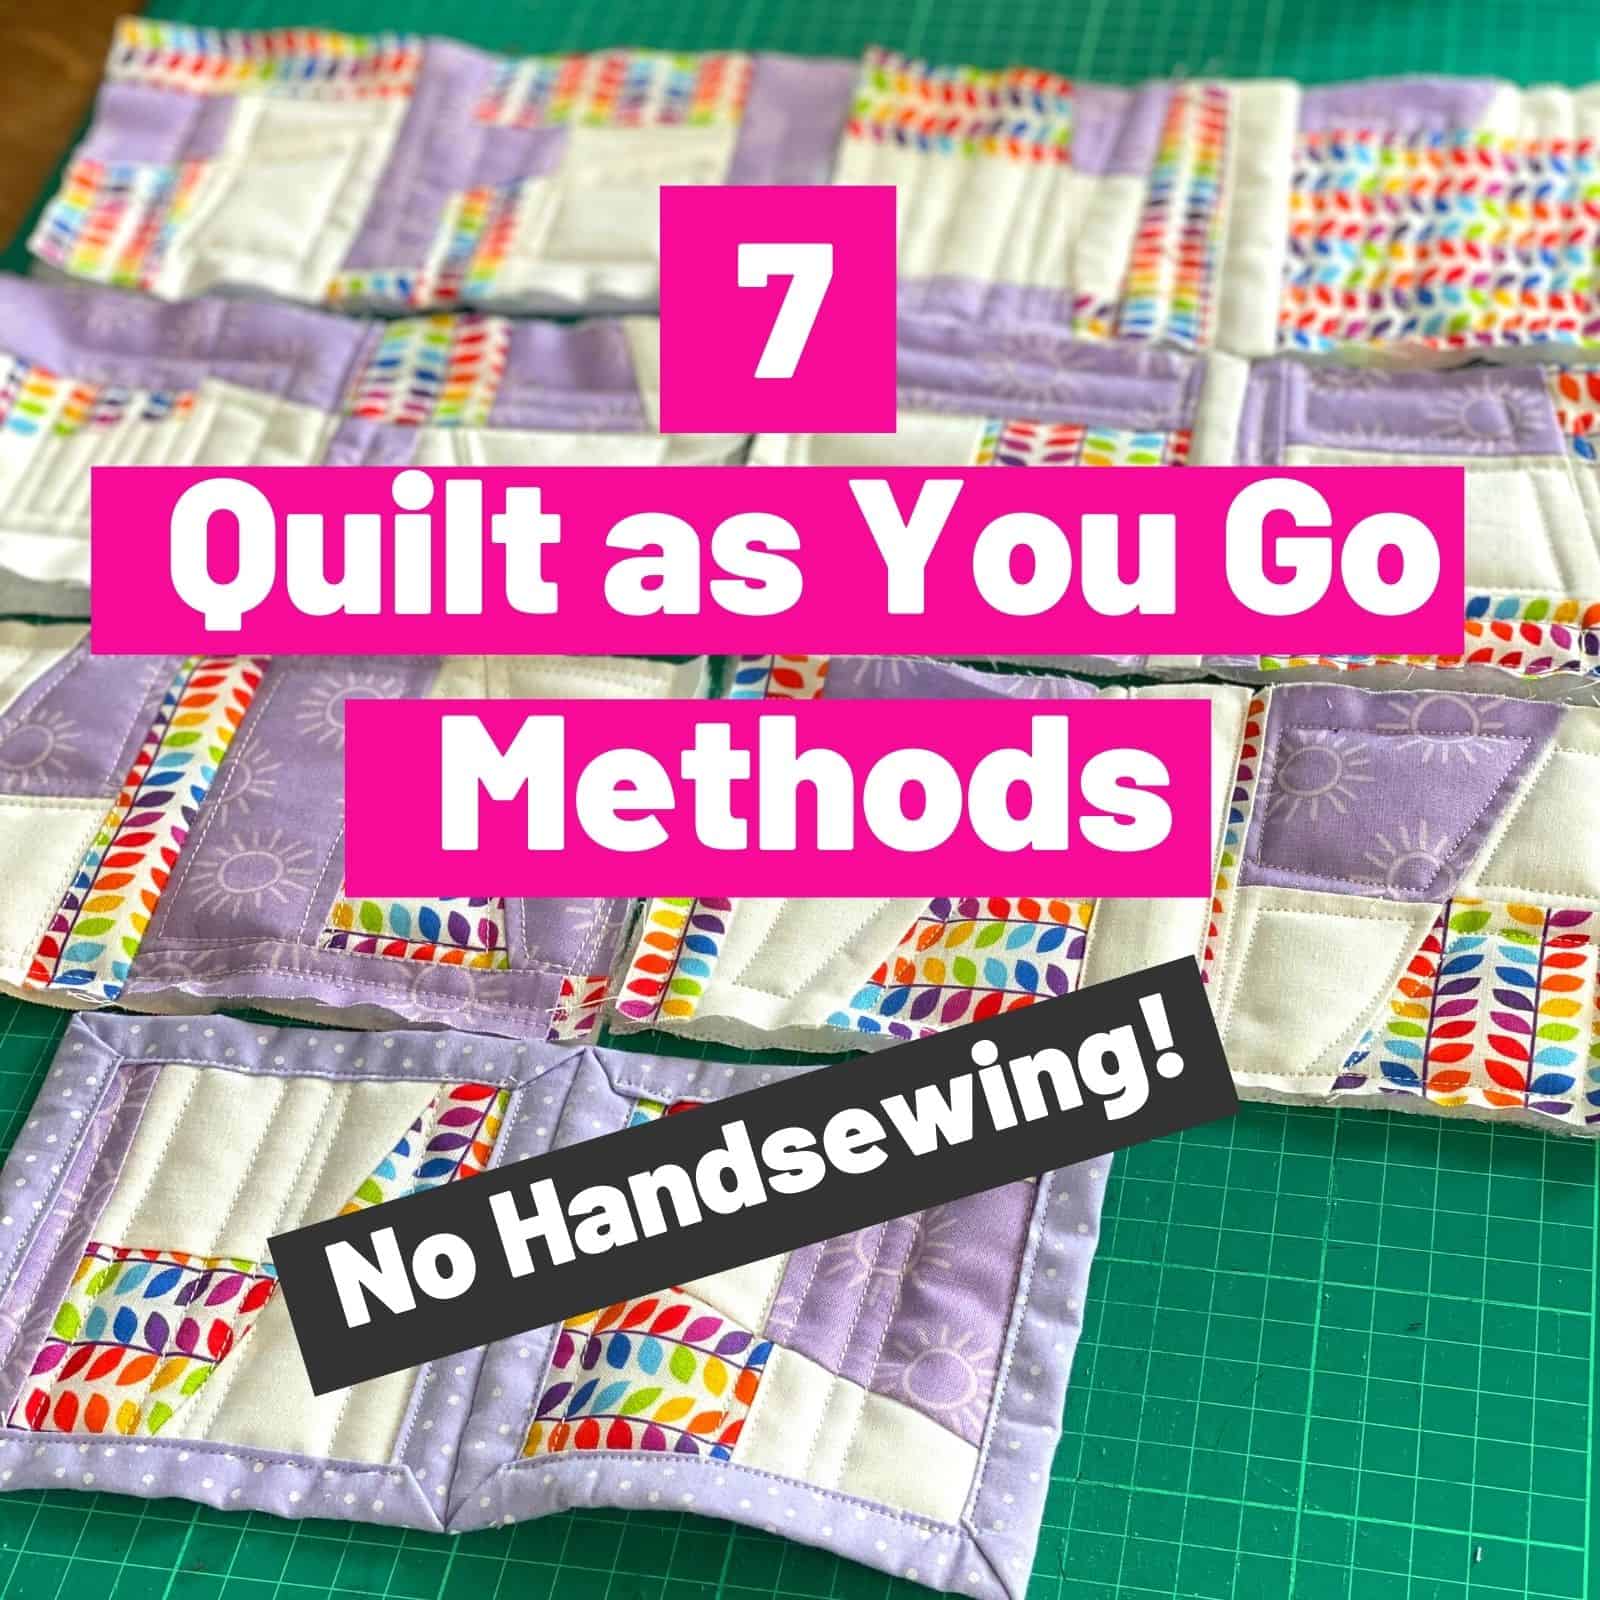 What Is Quilt-As-You-Go (Qayg)?